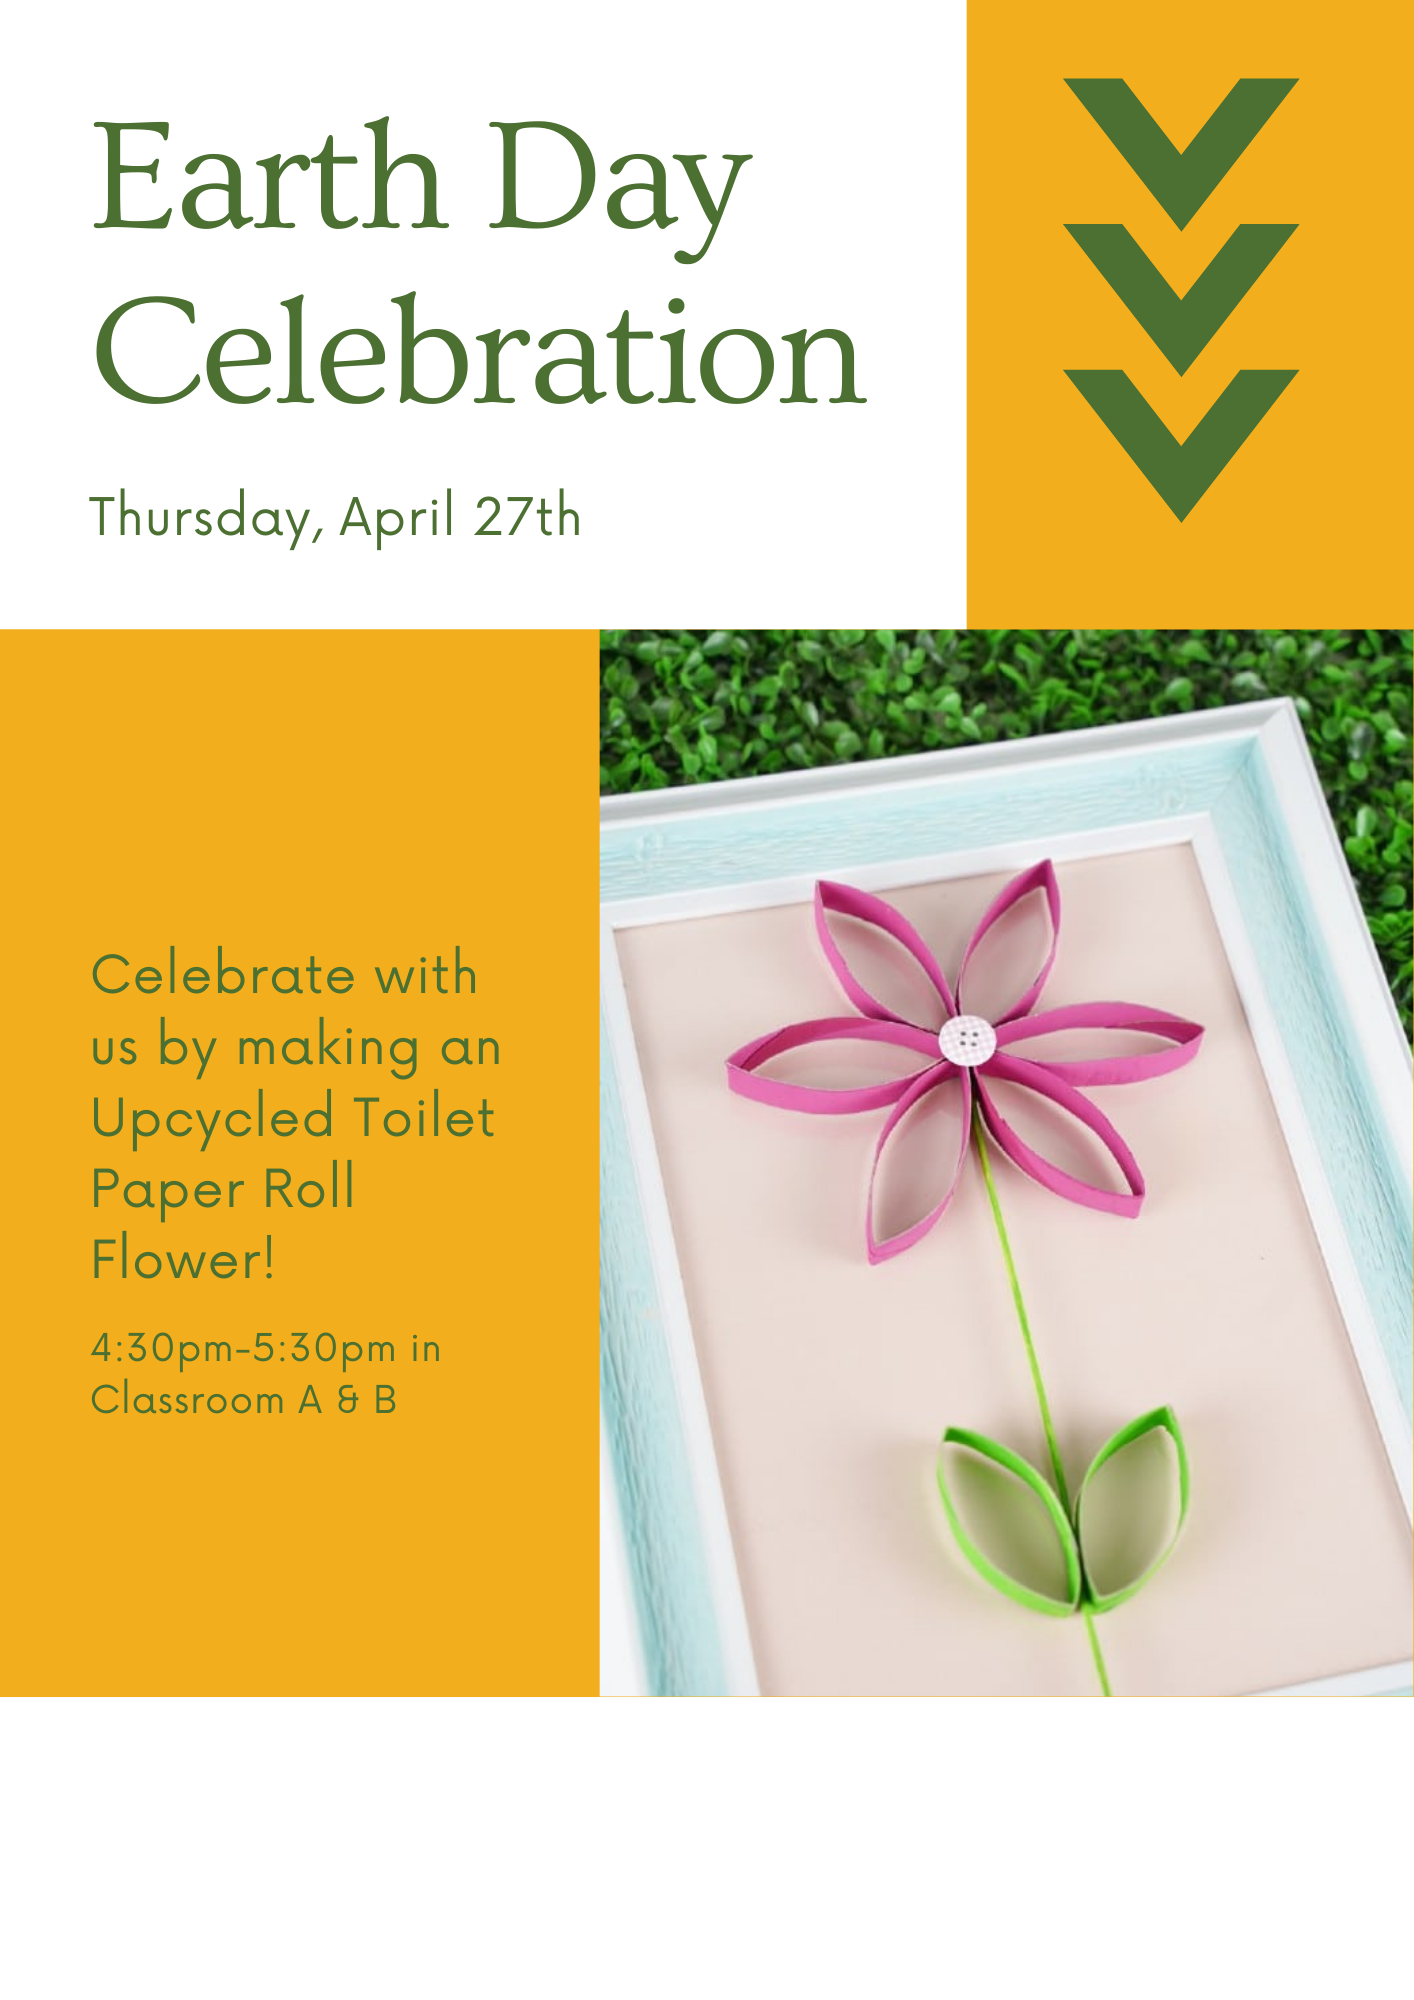 Earth Day Upcycled Toilet Paper Roll Flowers